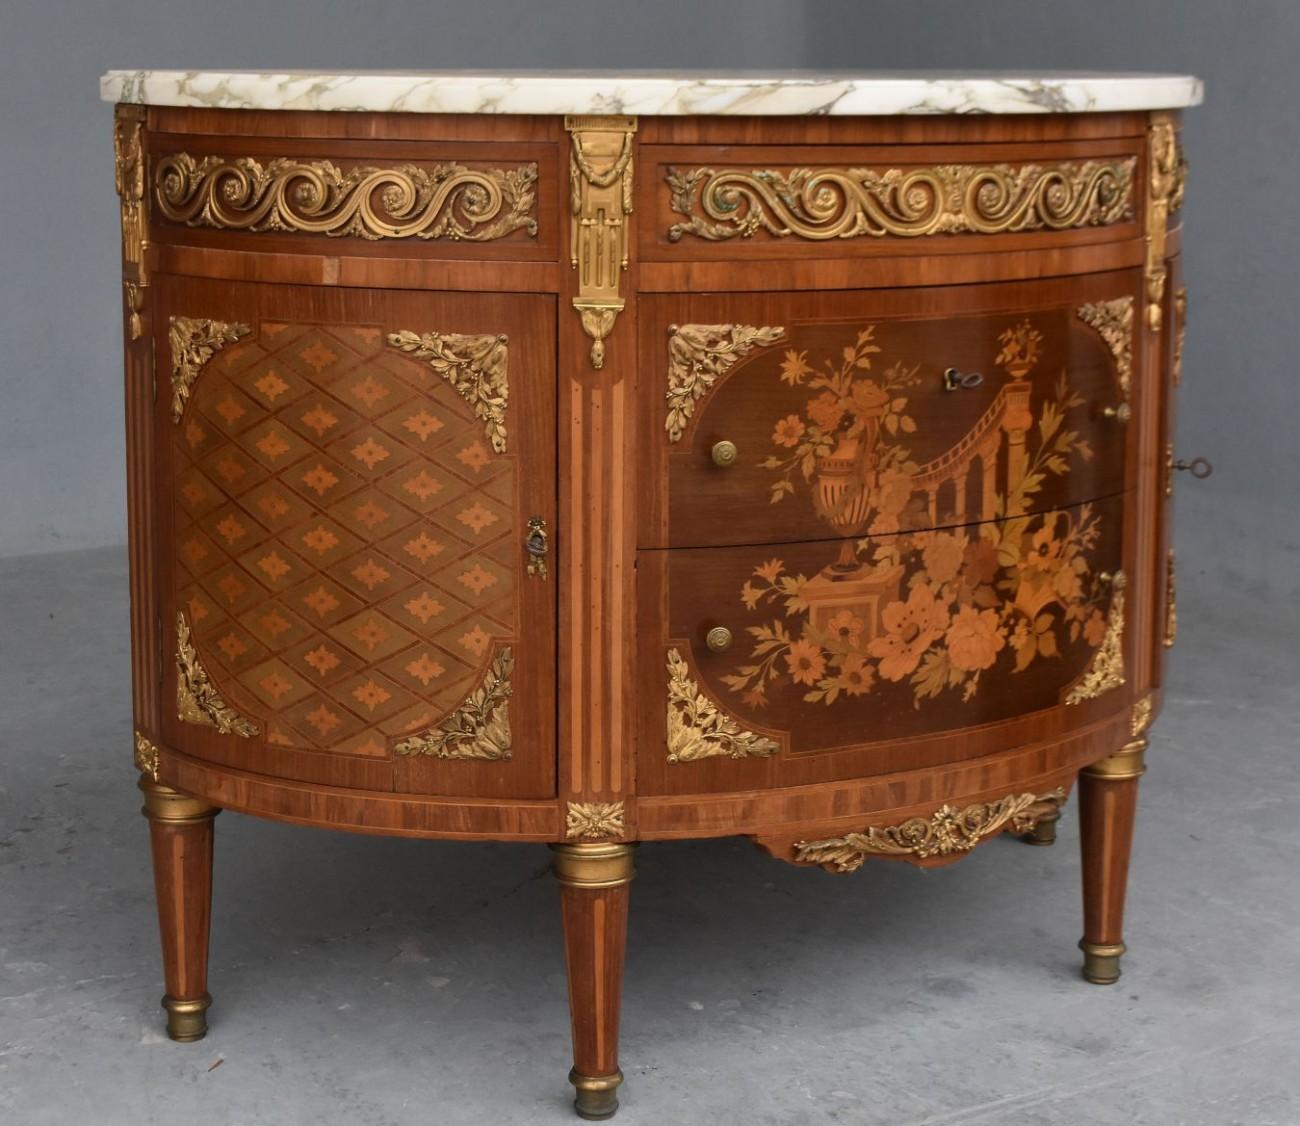 Half-moon doors inlaid commode Louis XVI late 19th century, rich gilded bronze trim, beautiful floral and architectural inlay, oak mounting.